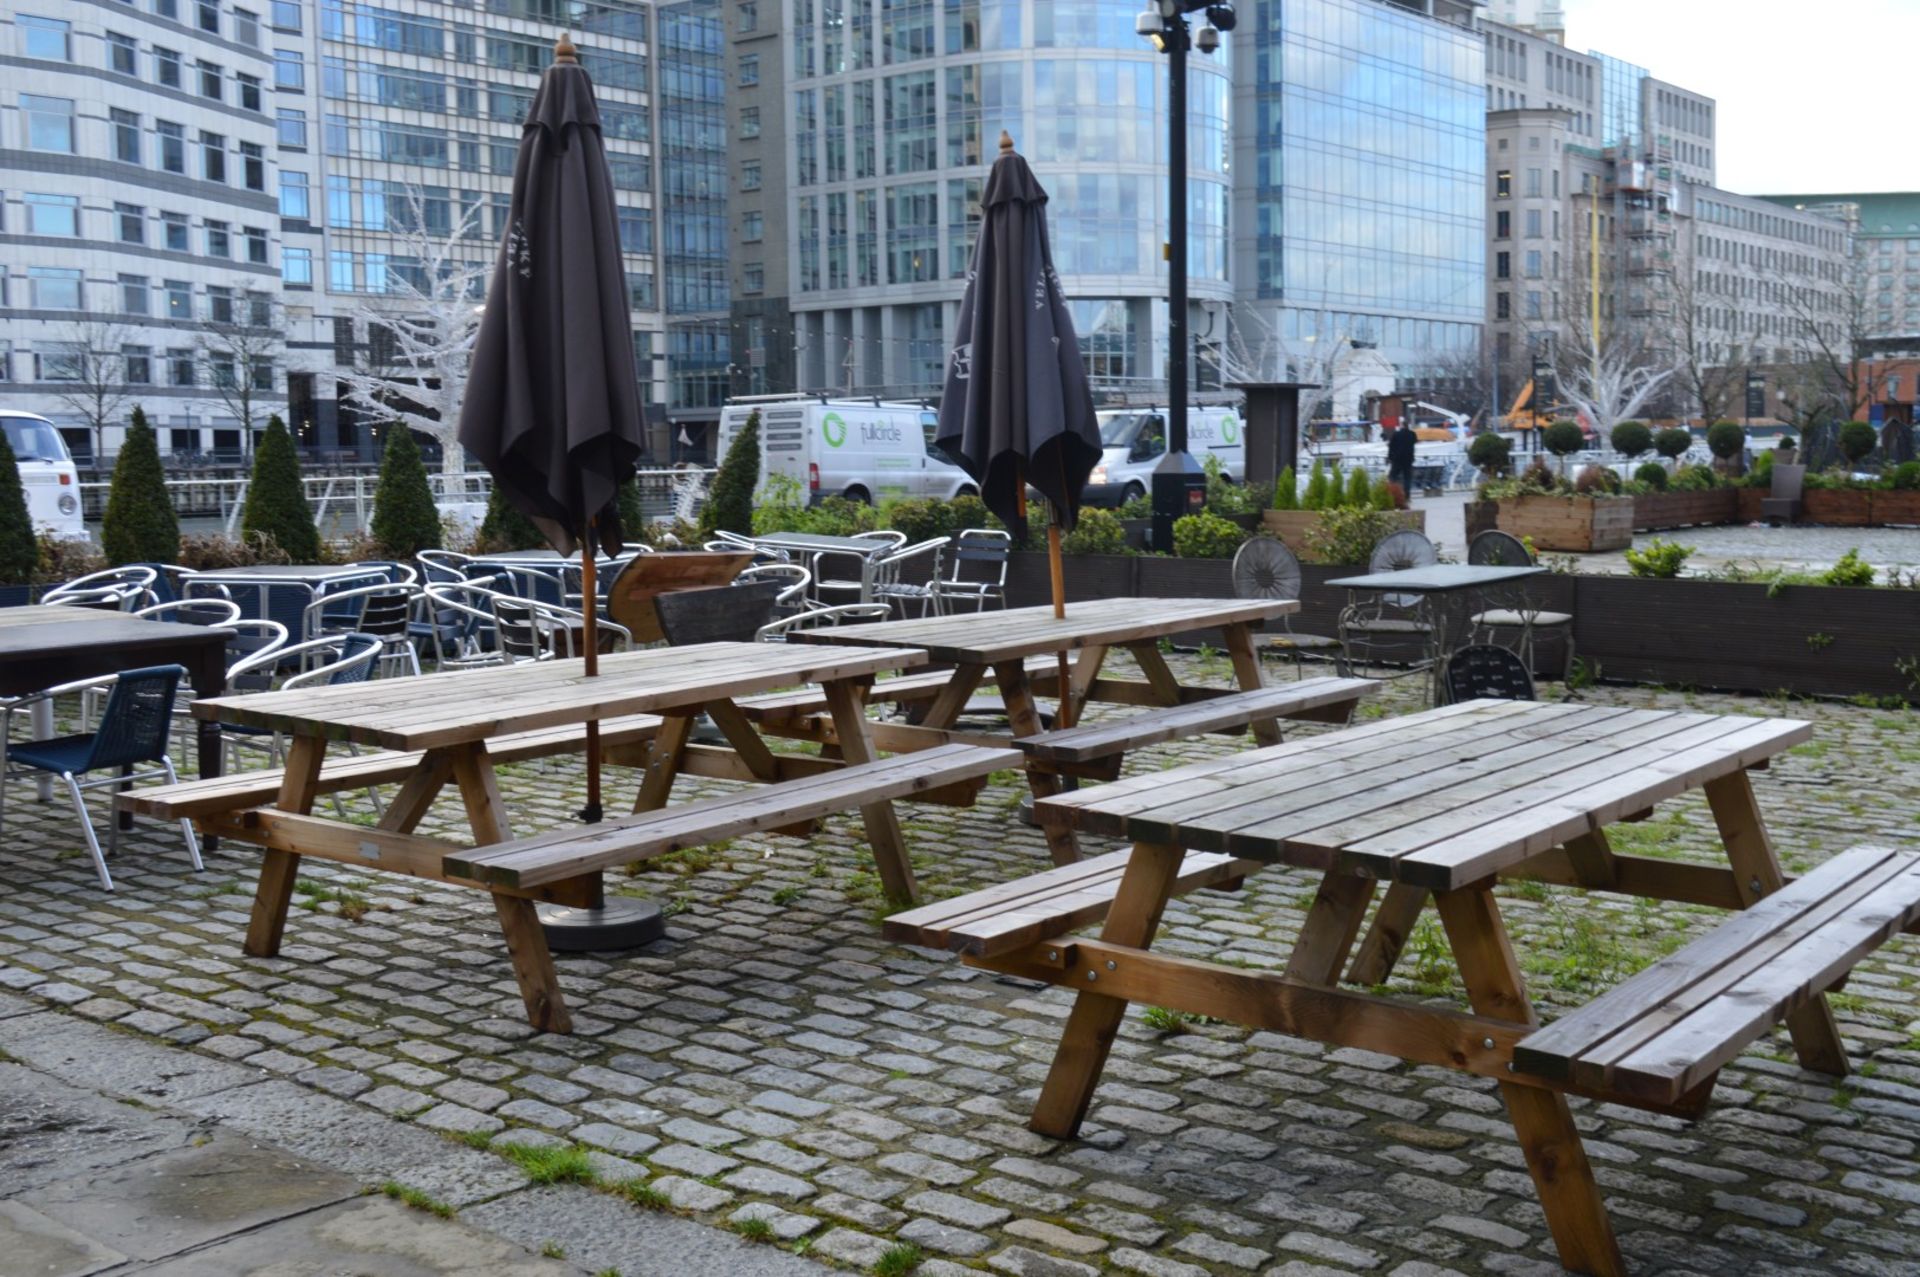 1 x Pub Garden Picnic Table With Attached Benches - For Heavy Duty Commercial Use - Manufactured - Image 3 of 3